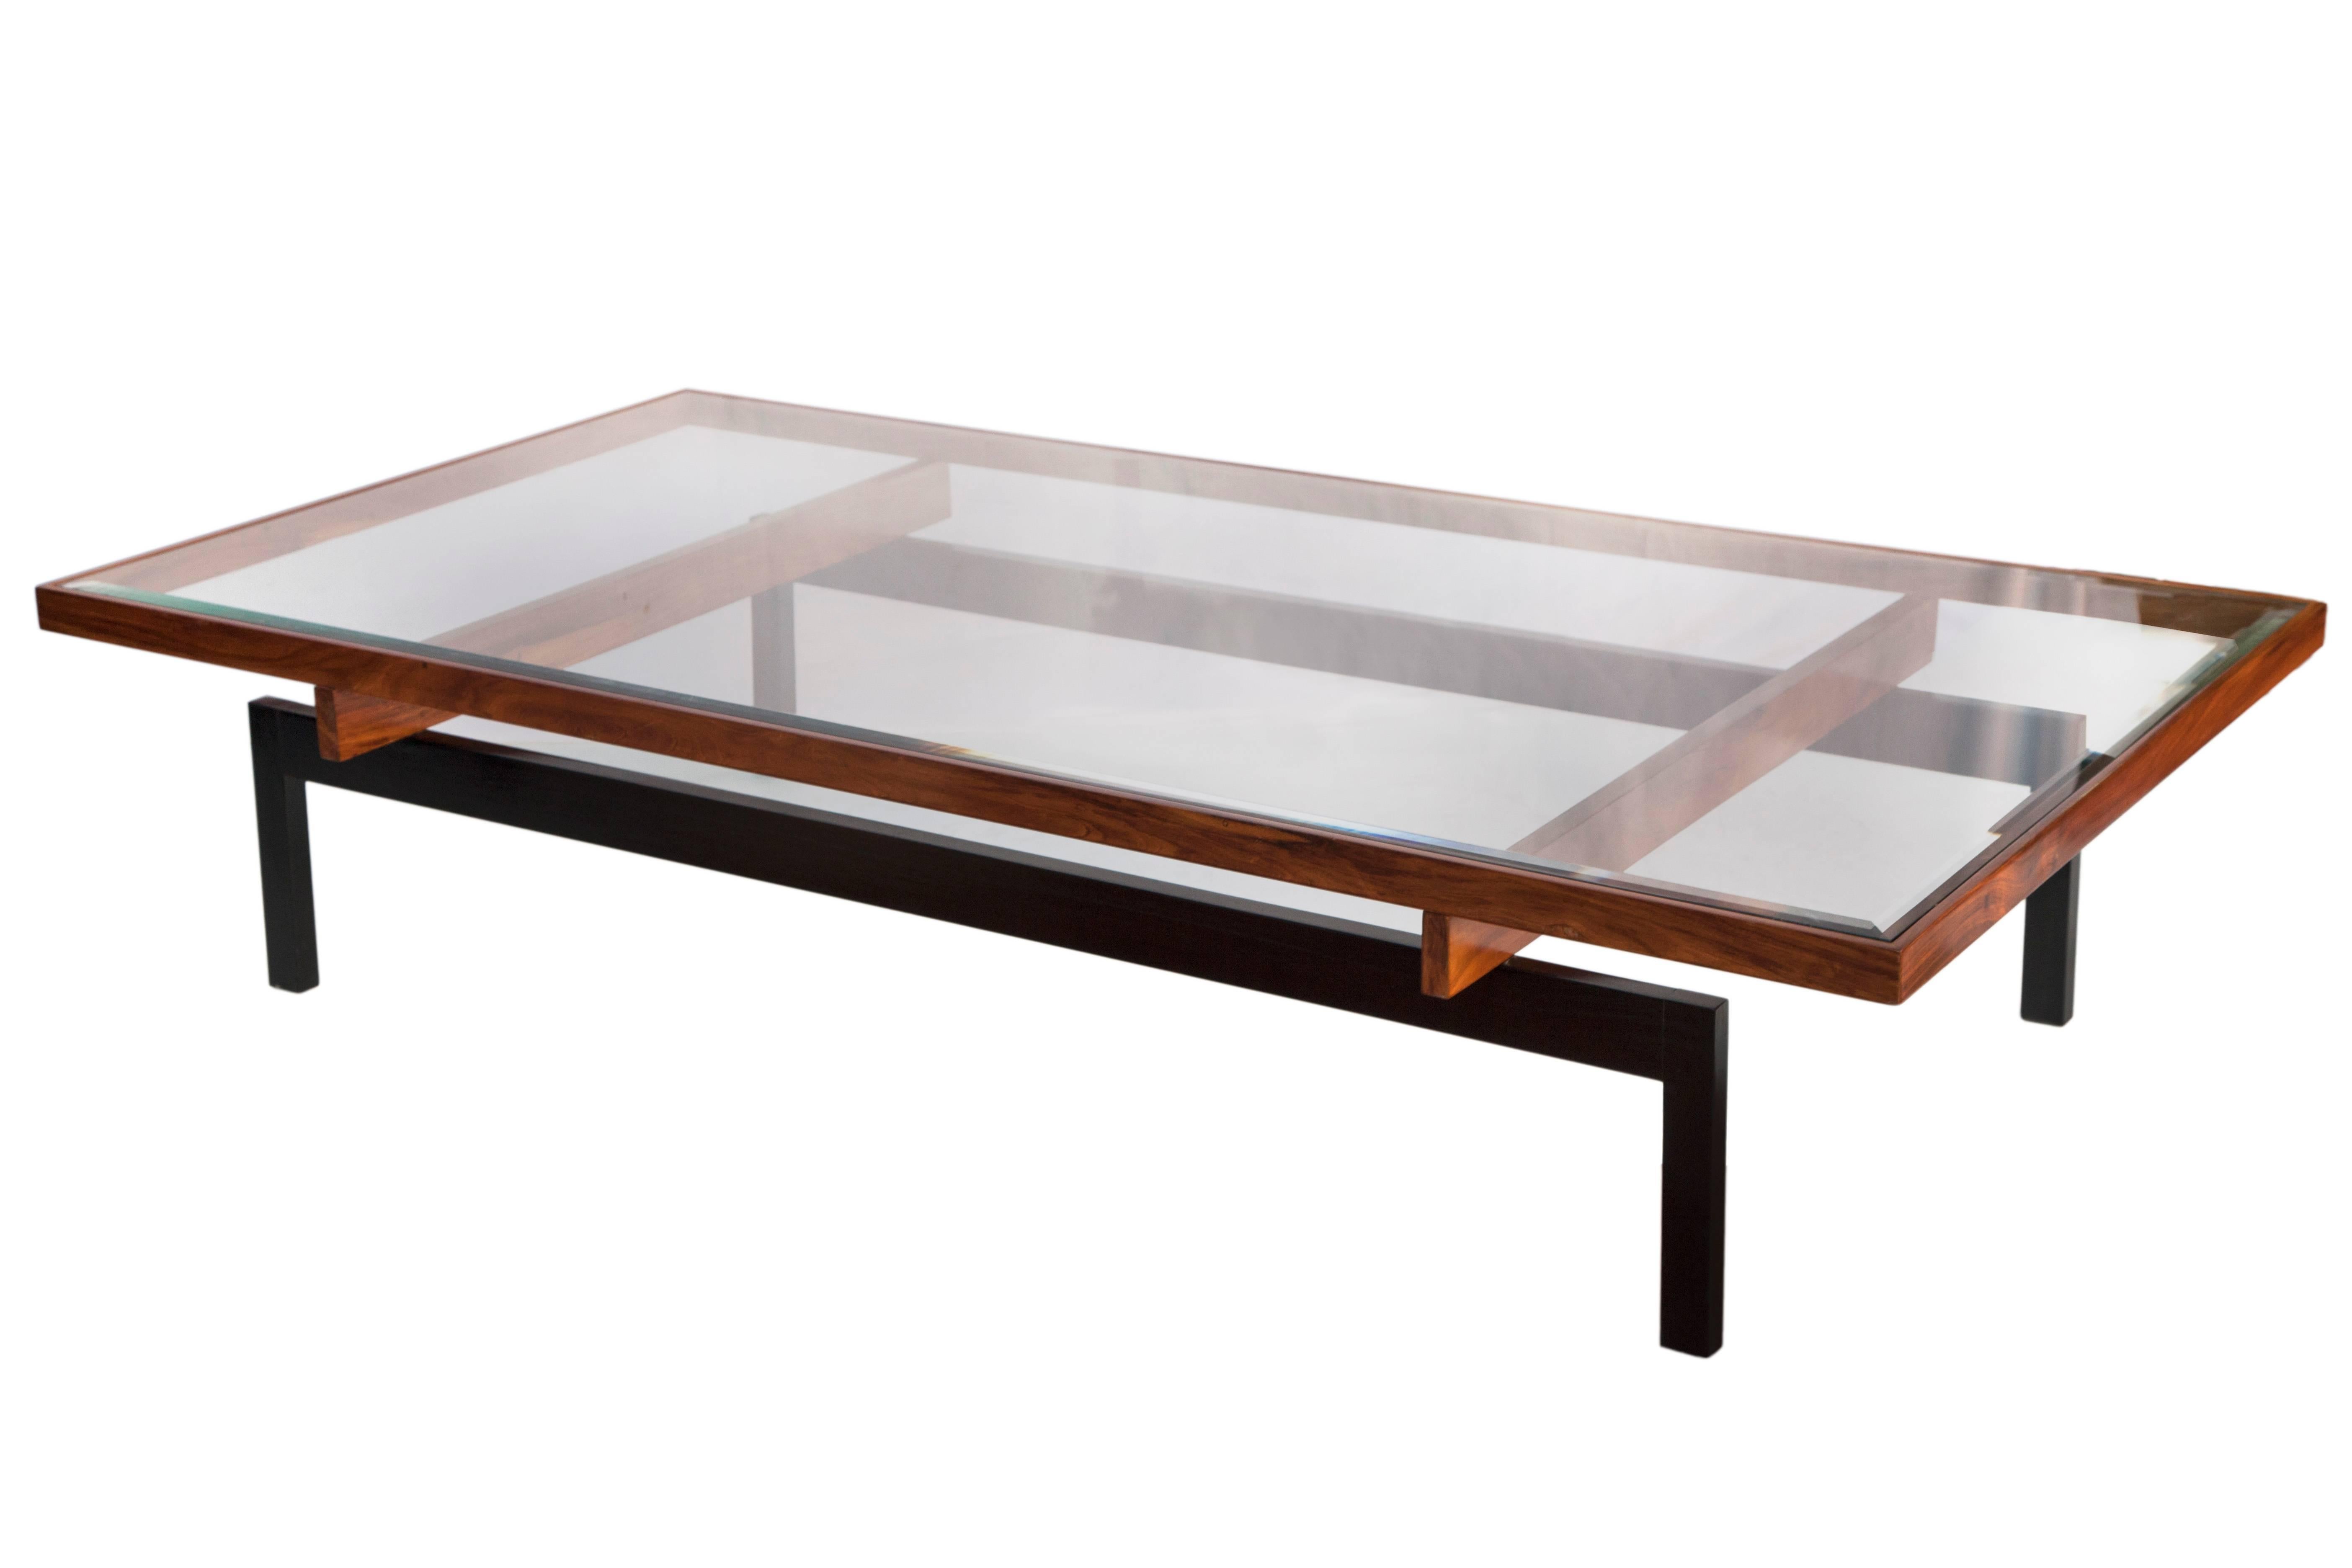 A 'Duas Cores' (two colors) coffee table, produced circa 1950s in Brazil by furniture company Branco & Preto, with glass top against modern linear bicolored base. Very good vintage condition.

10903